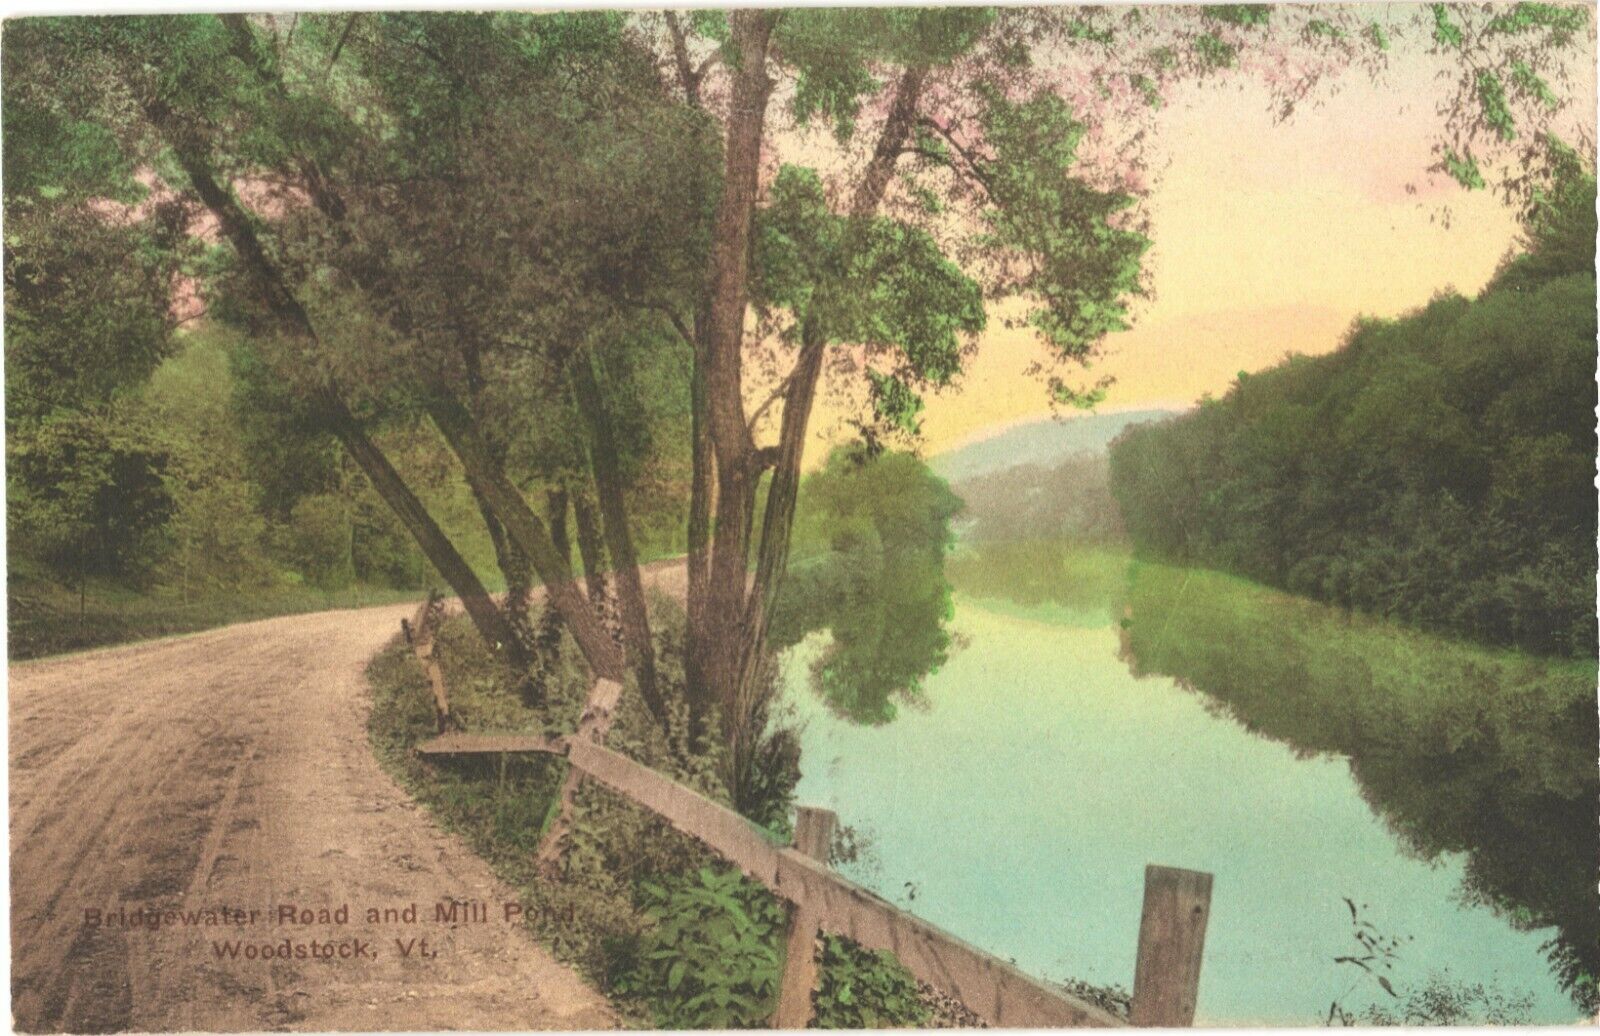 Serene View At The Bridgewater Road And Mill Pond, Woodstock, Vermont Postcard